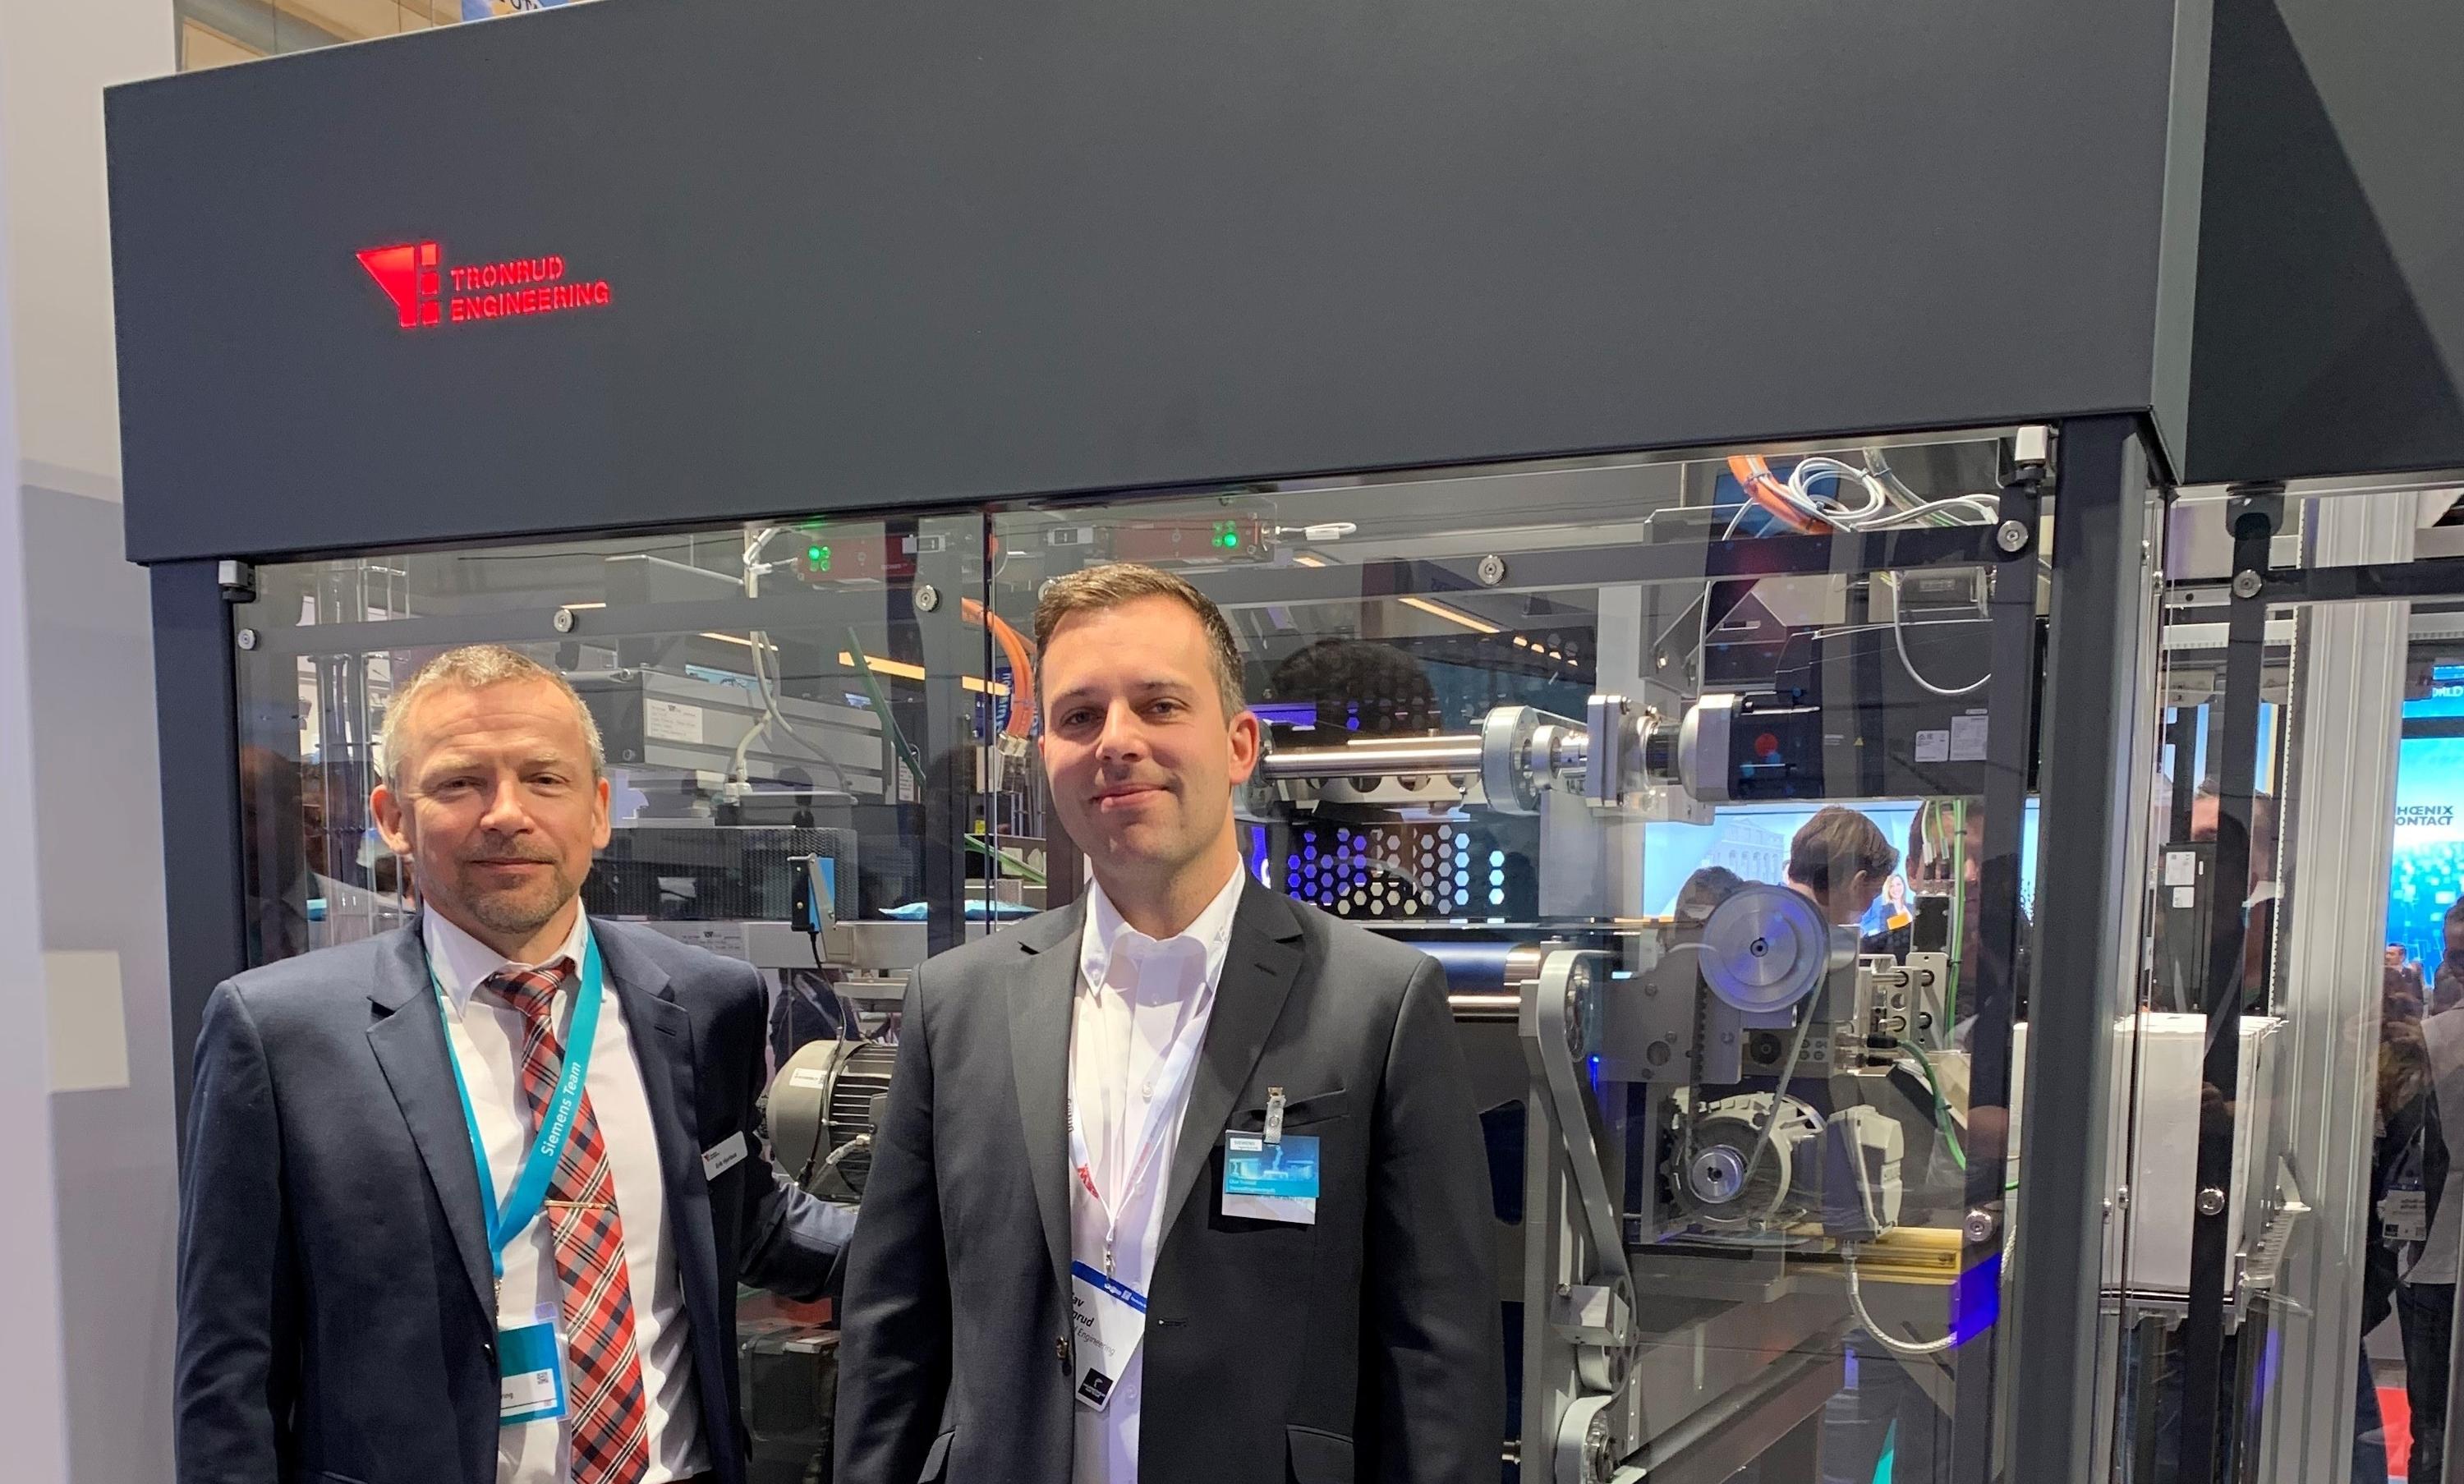 First Norwegian company presented by Siemens at the Hannover Messe 2019